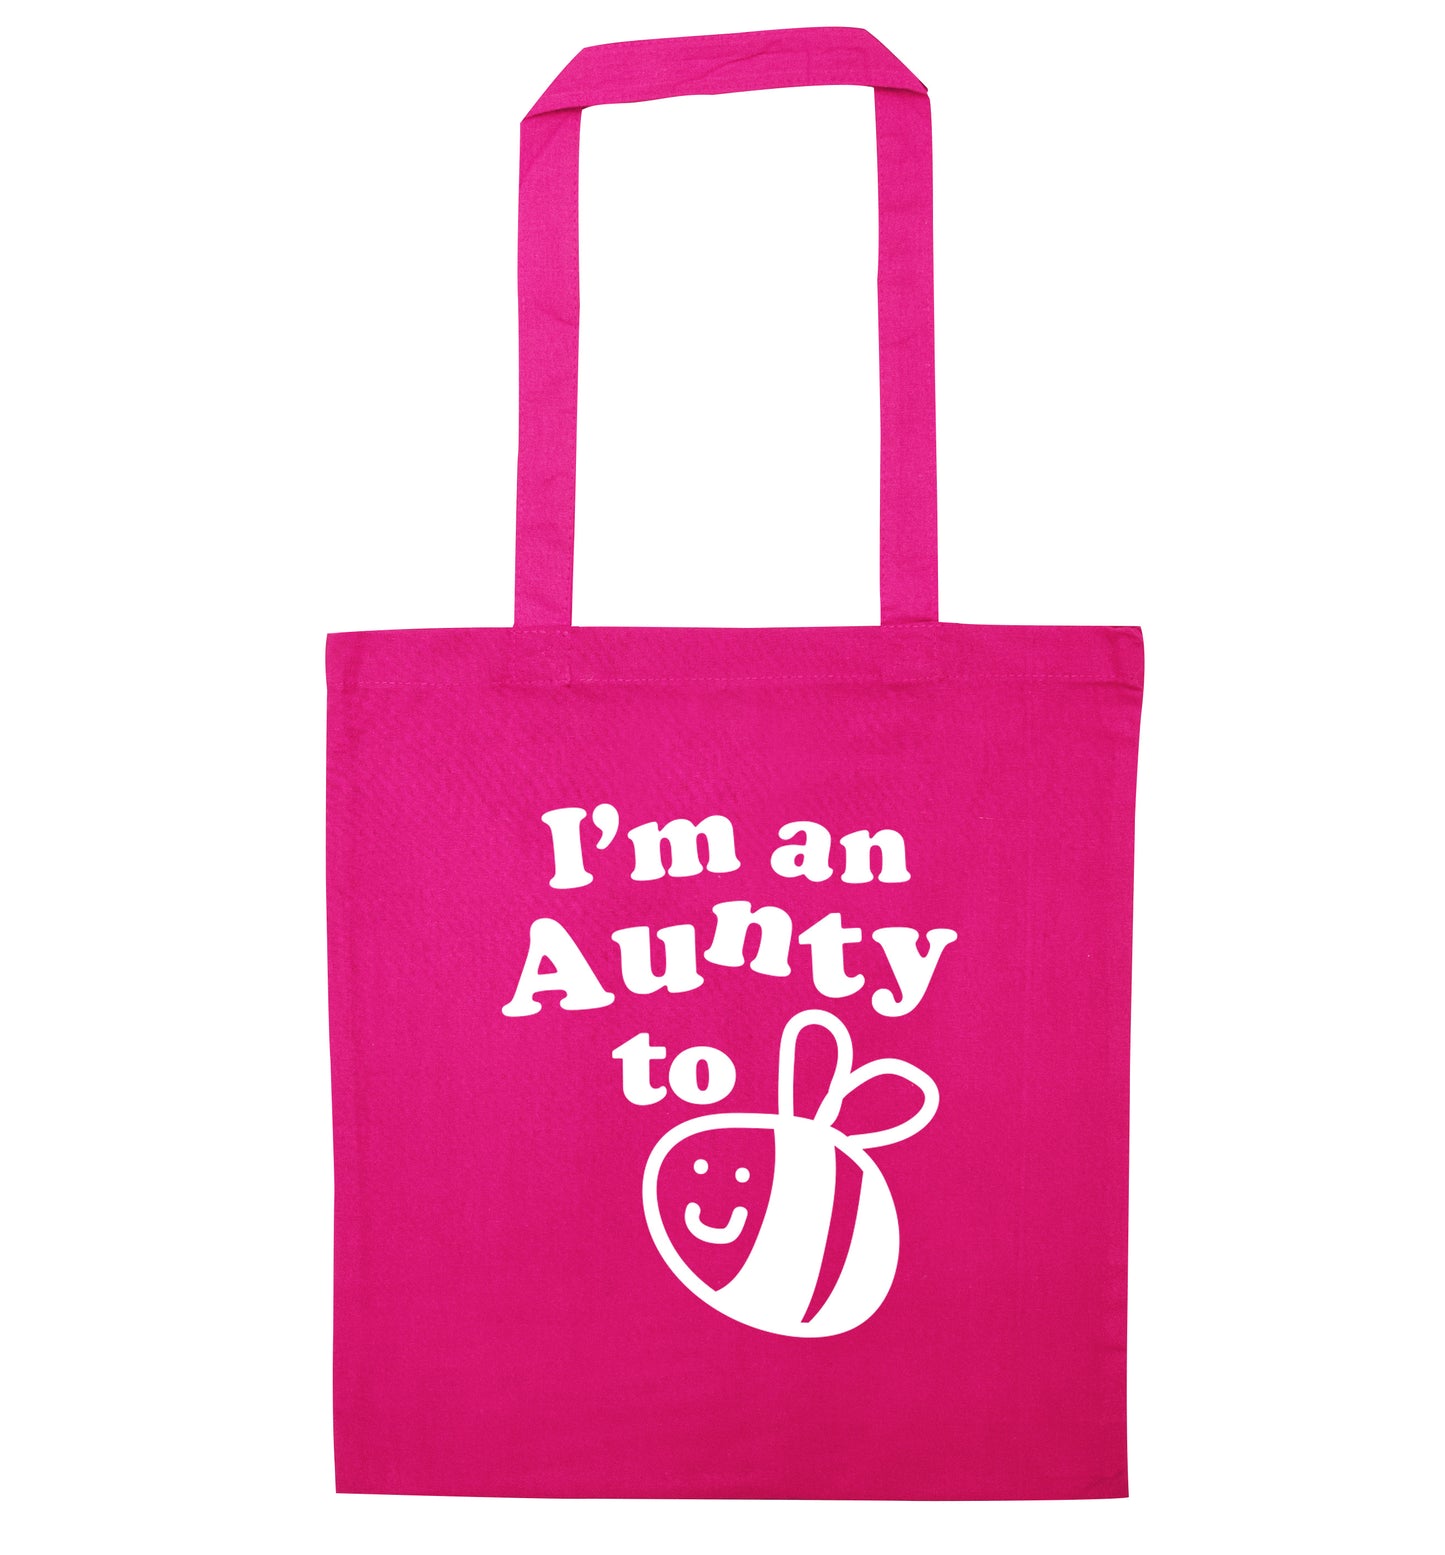 I'm an aunty to be pink tote bag